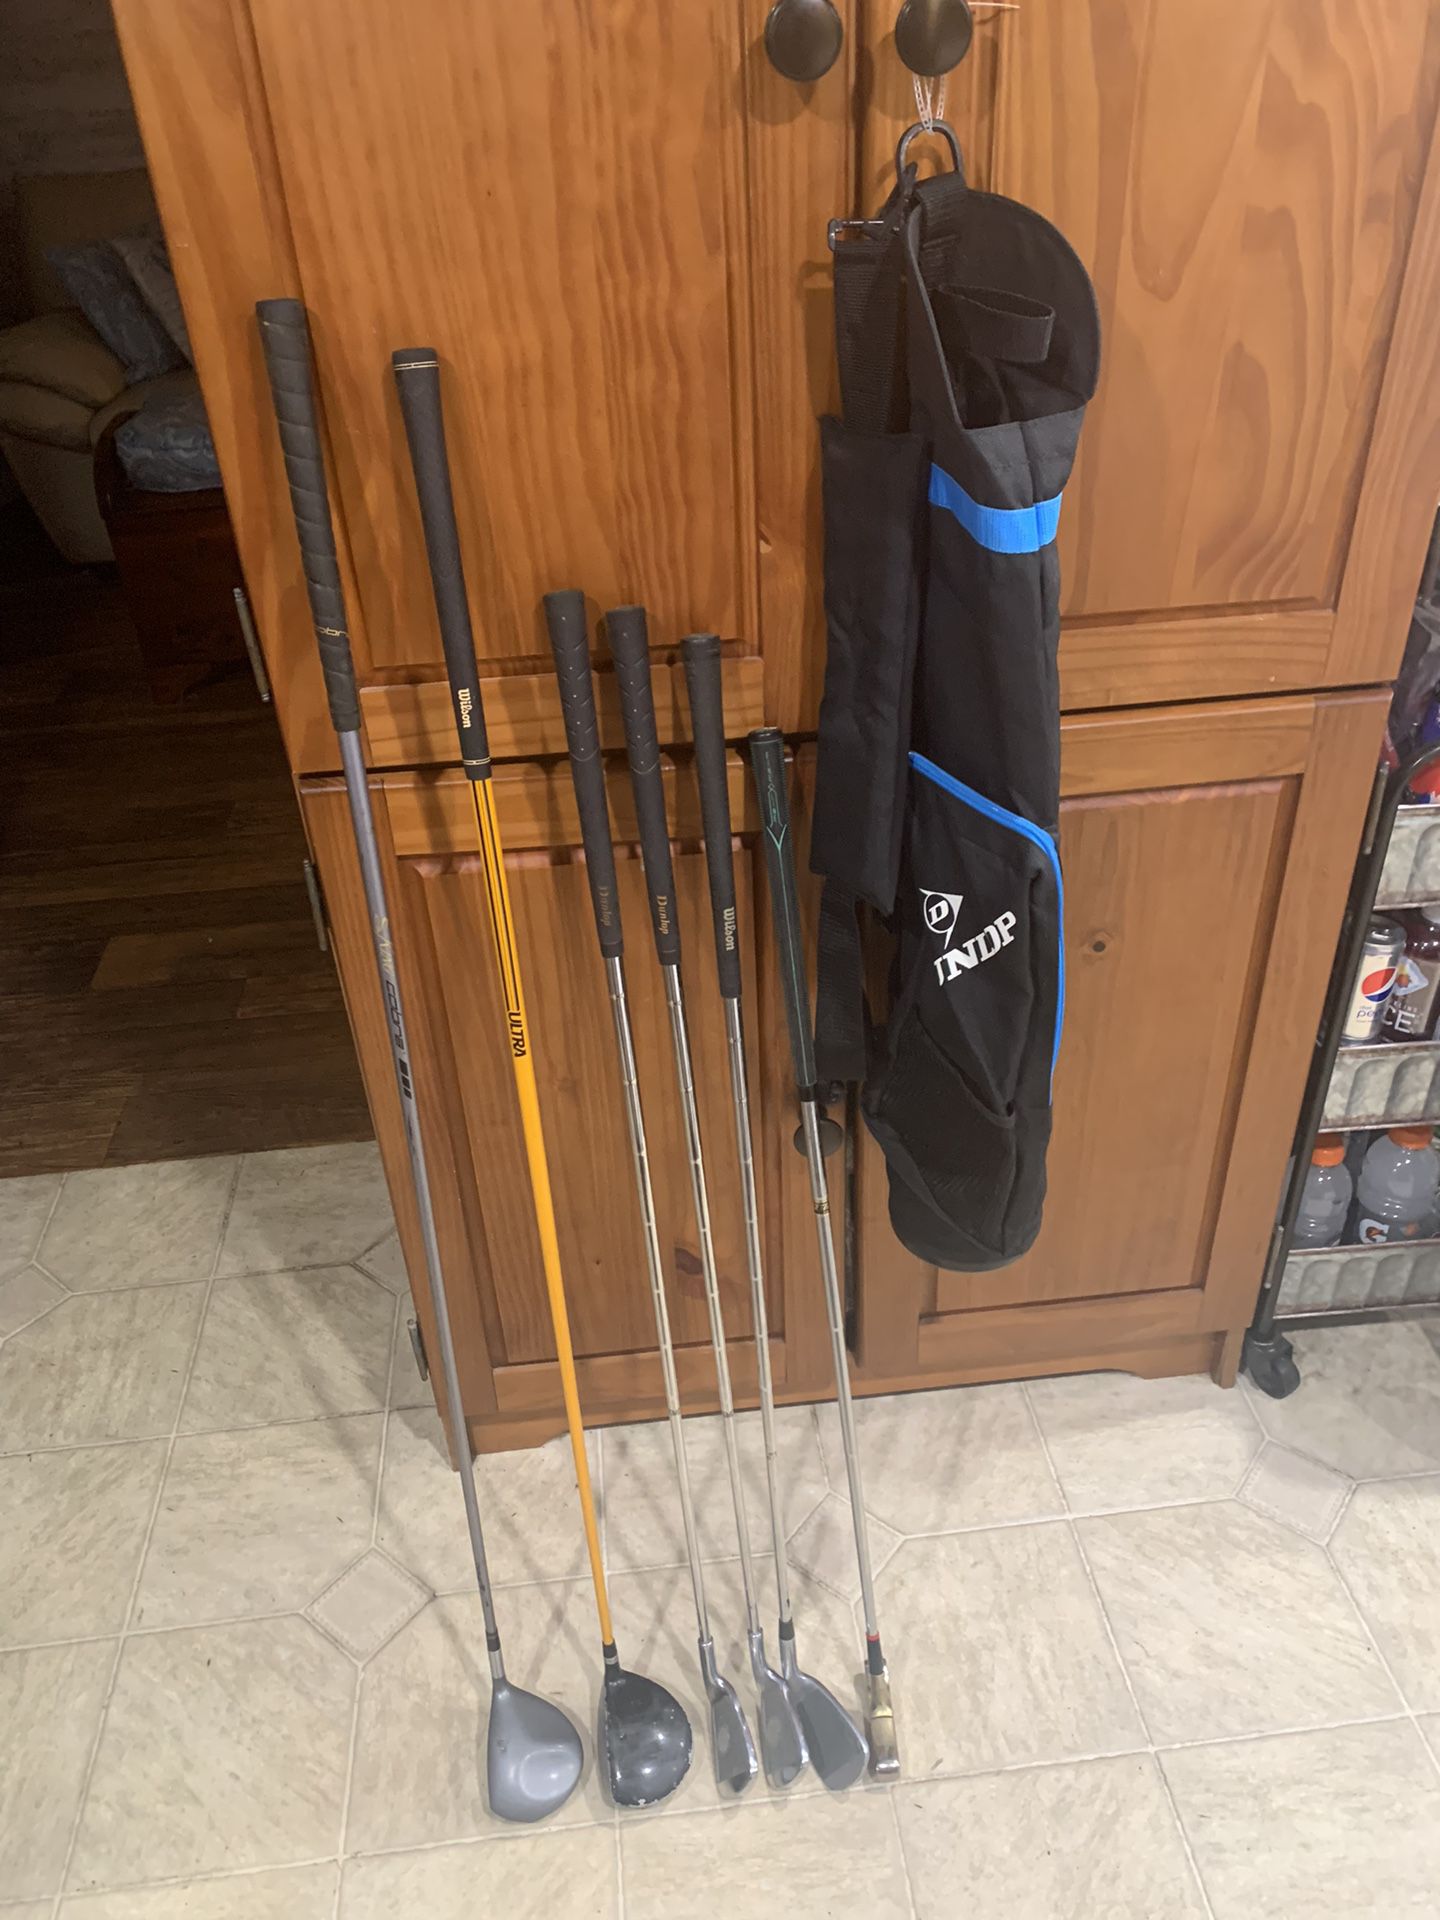 Mens Left Handed Sunday Golf Set for Sale in Rochester, NH - OfferUp